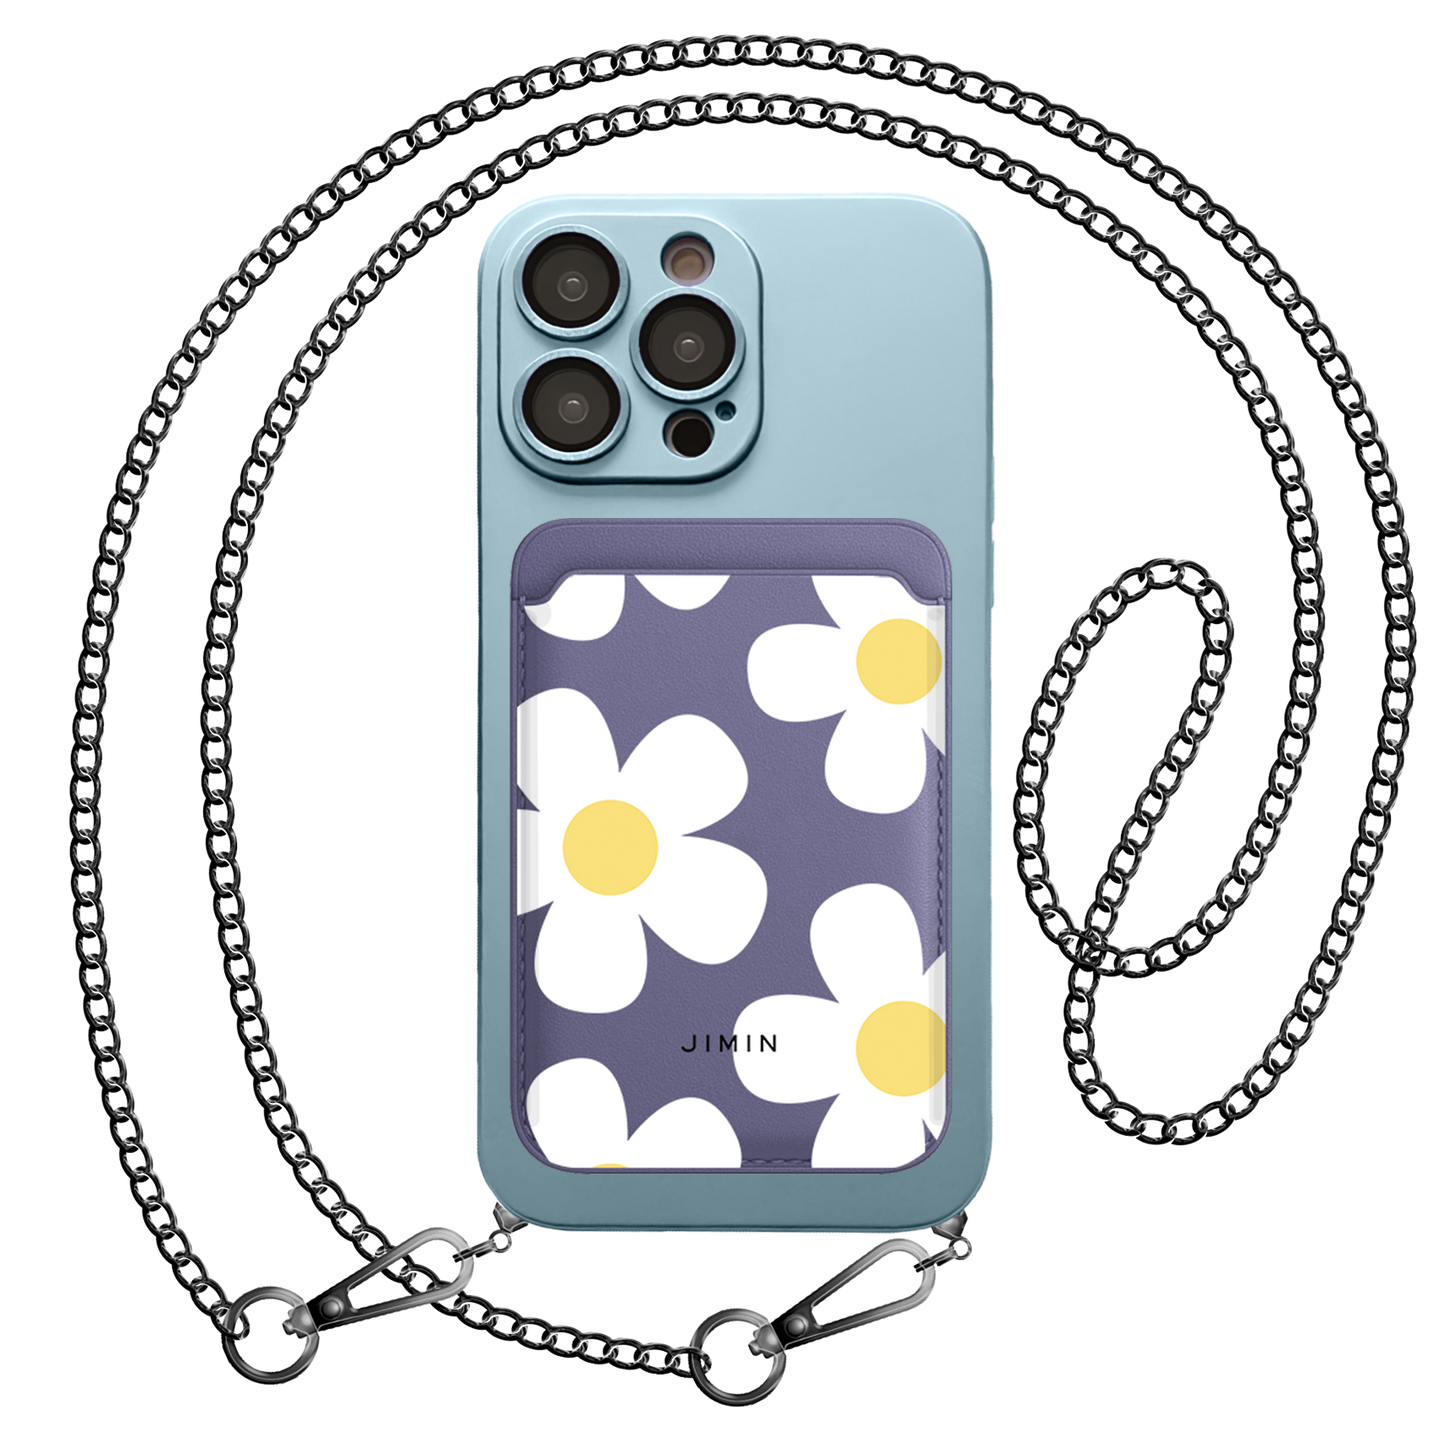 iPhone Magnetic Wallet Silicone Case - Daisy 4.0